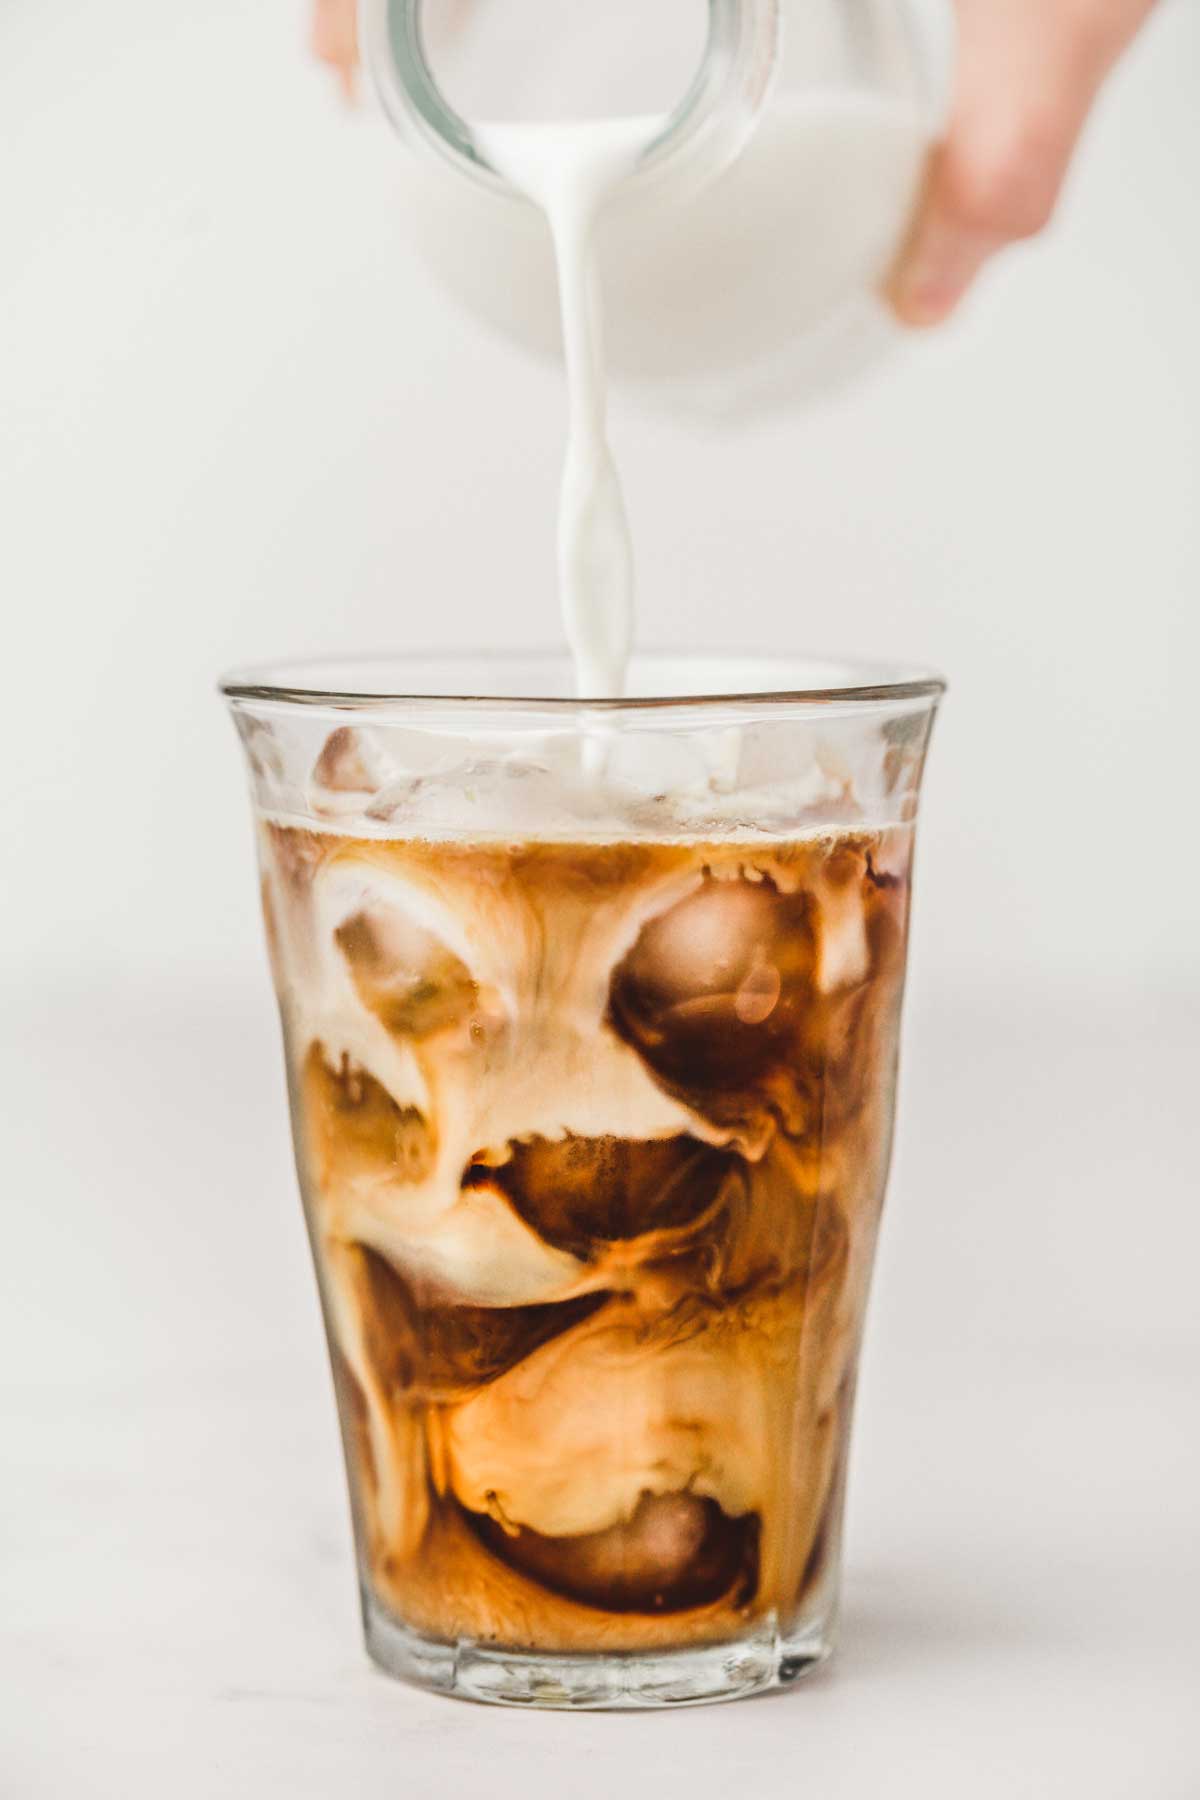 How to make Vanilla Iced Coffee [Easy Daily]